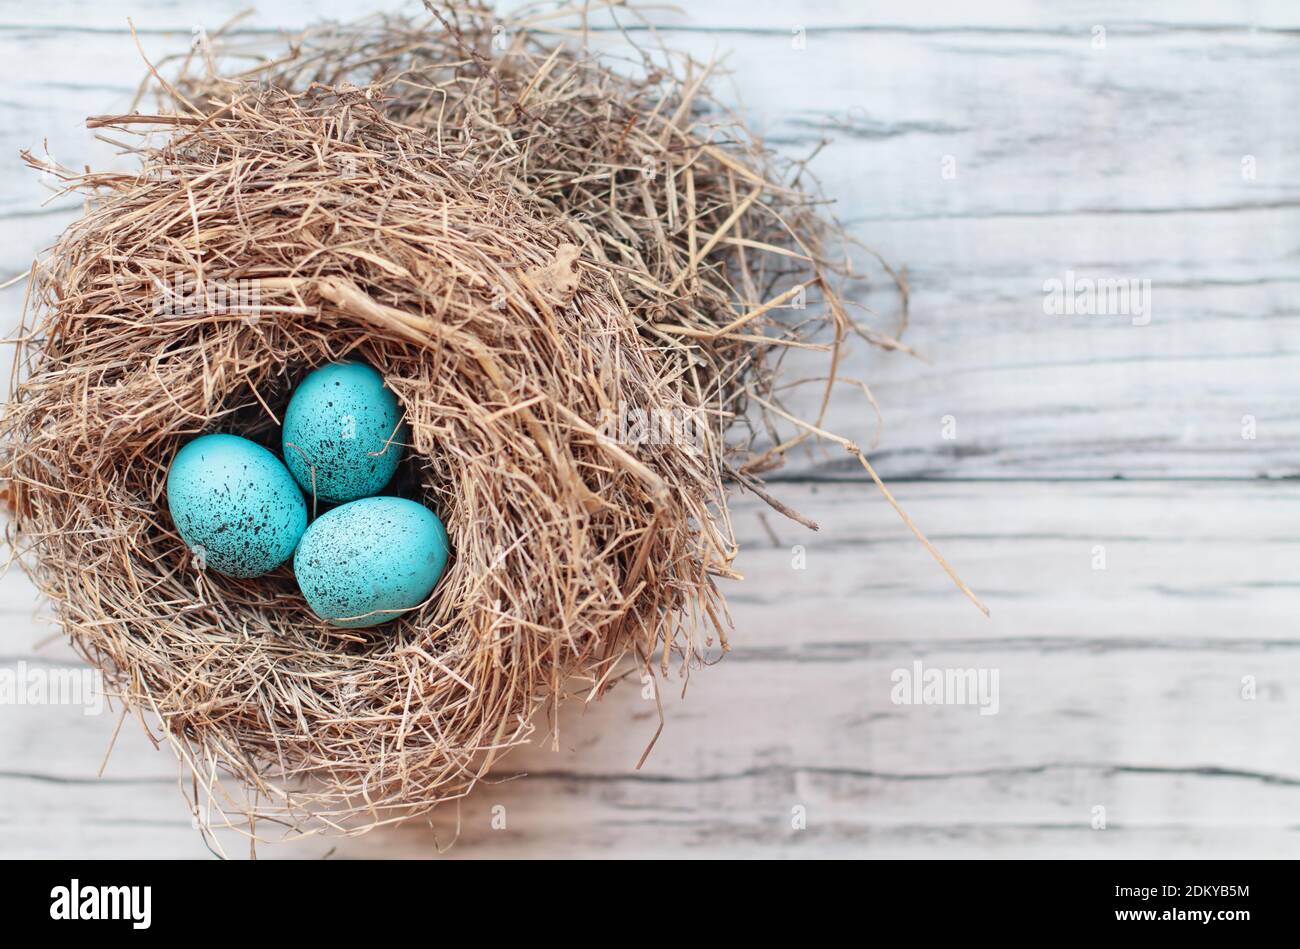 Real nest with blue speckled colored bird eggs on a rustic white wooden background. Top view, flat lay. Selective focus with blurred background. Stock Photo